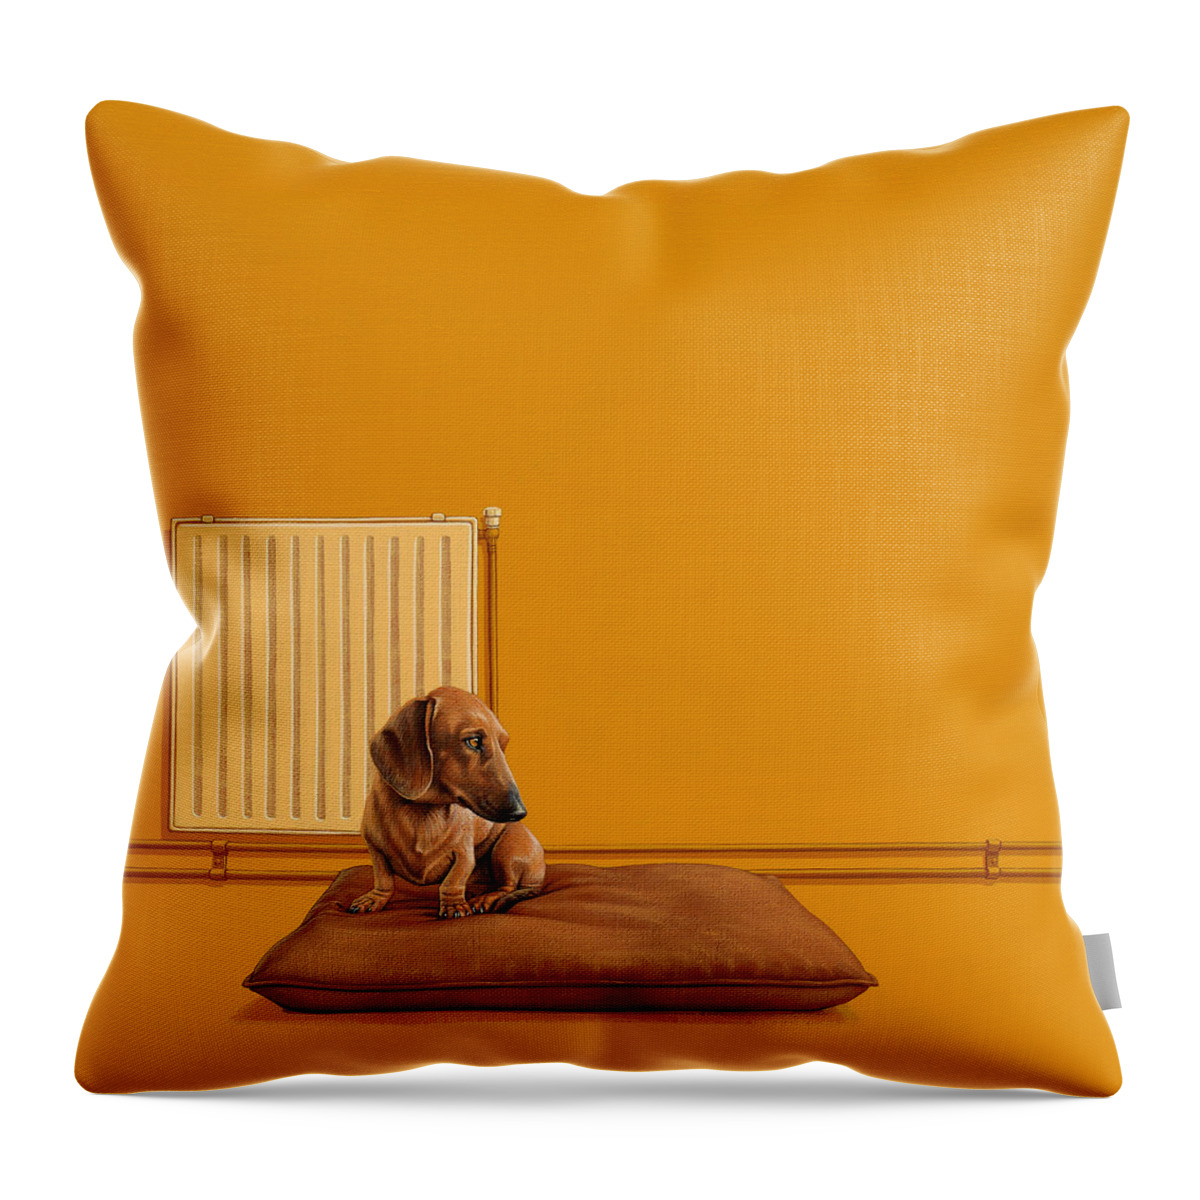 Dachshund Throw Pillow featuring the painting Jonas by Jasper Oostland